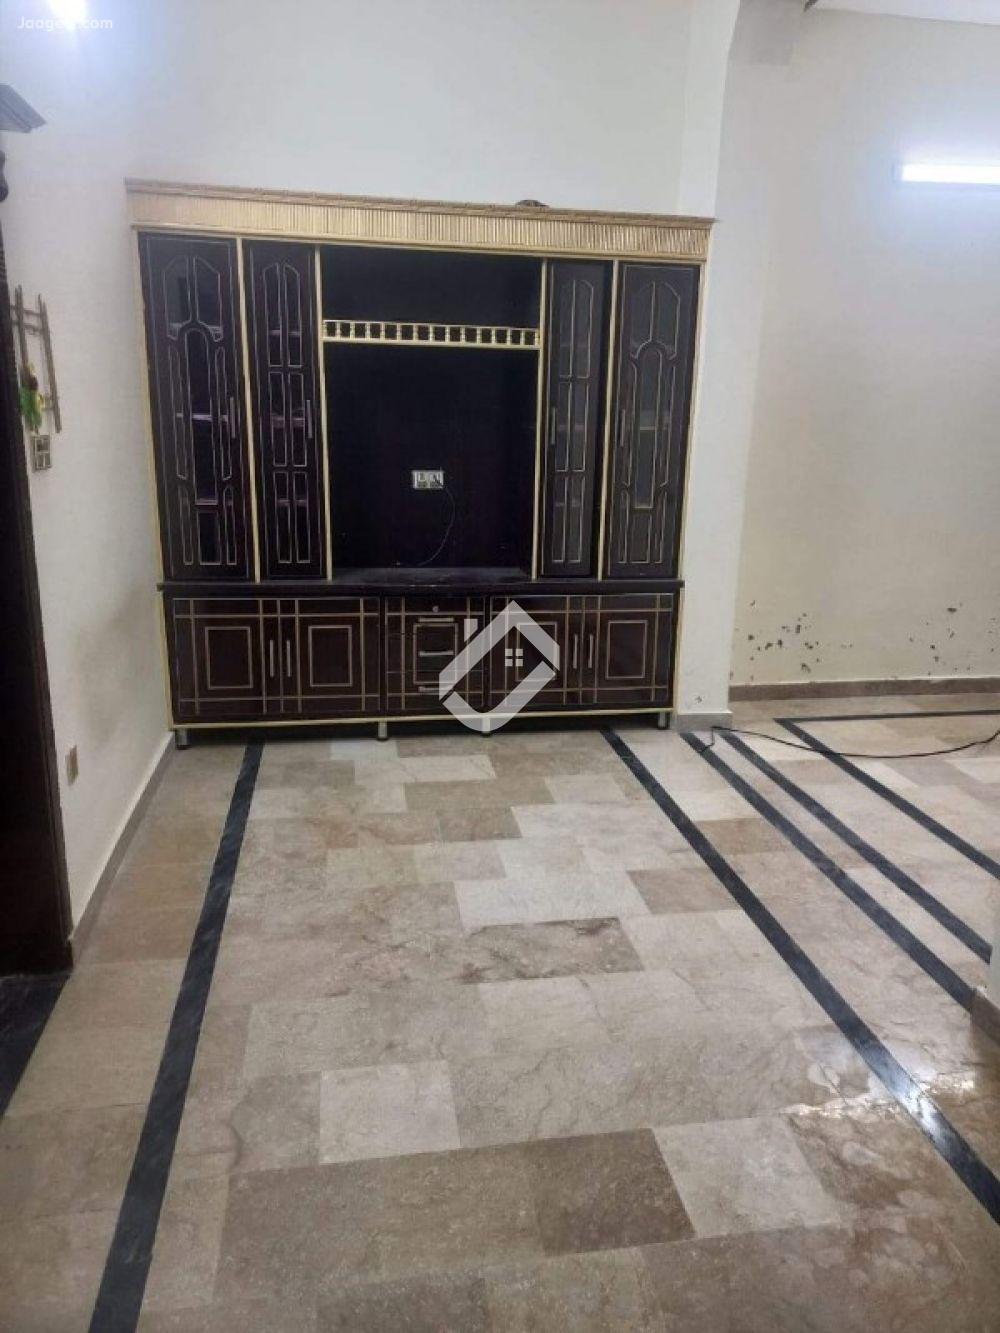 View  4 Marla Lower Portion House For Rent In Ghauri Town  in Ghauri Town, Islamabad